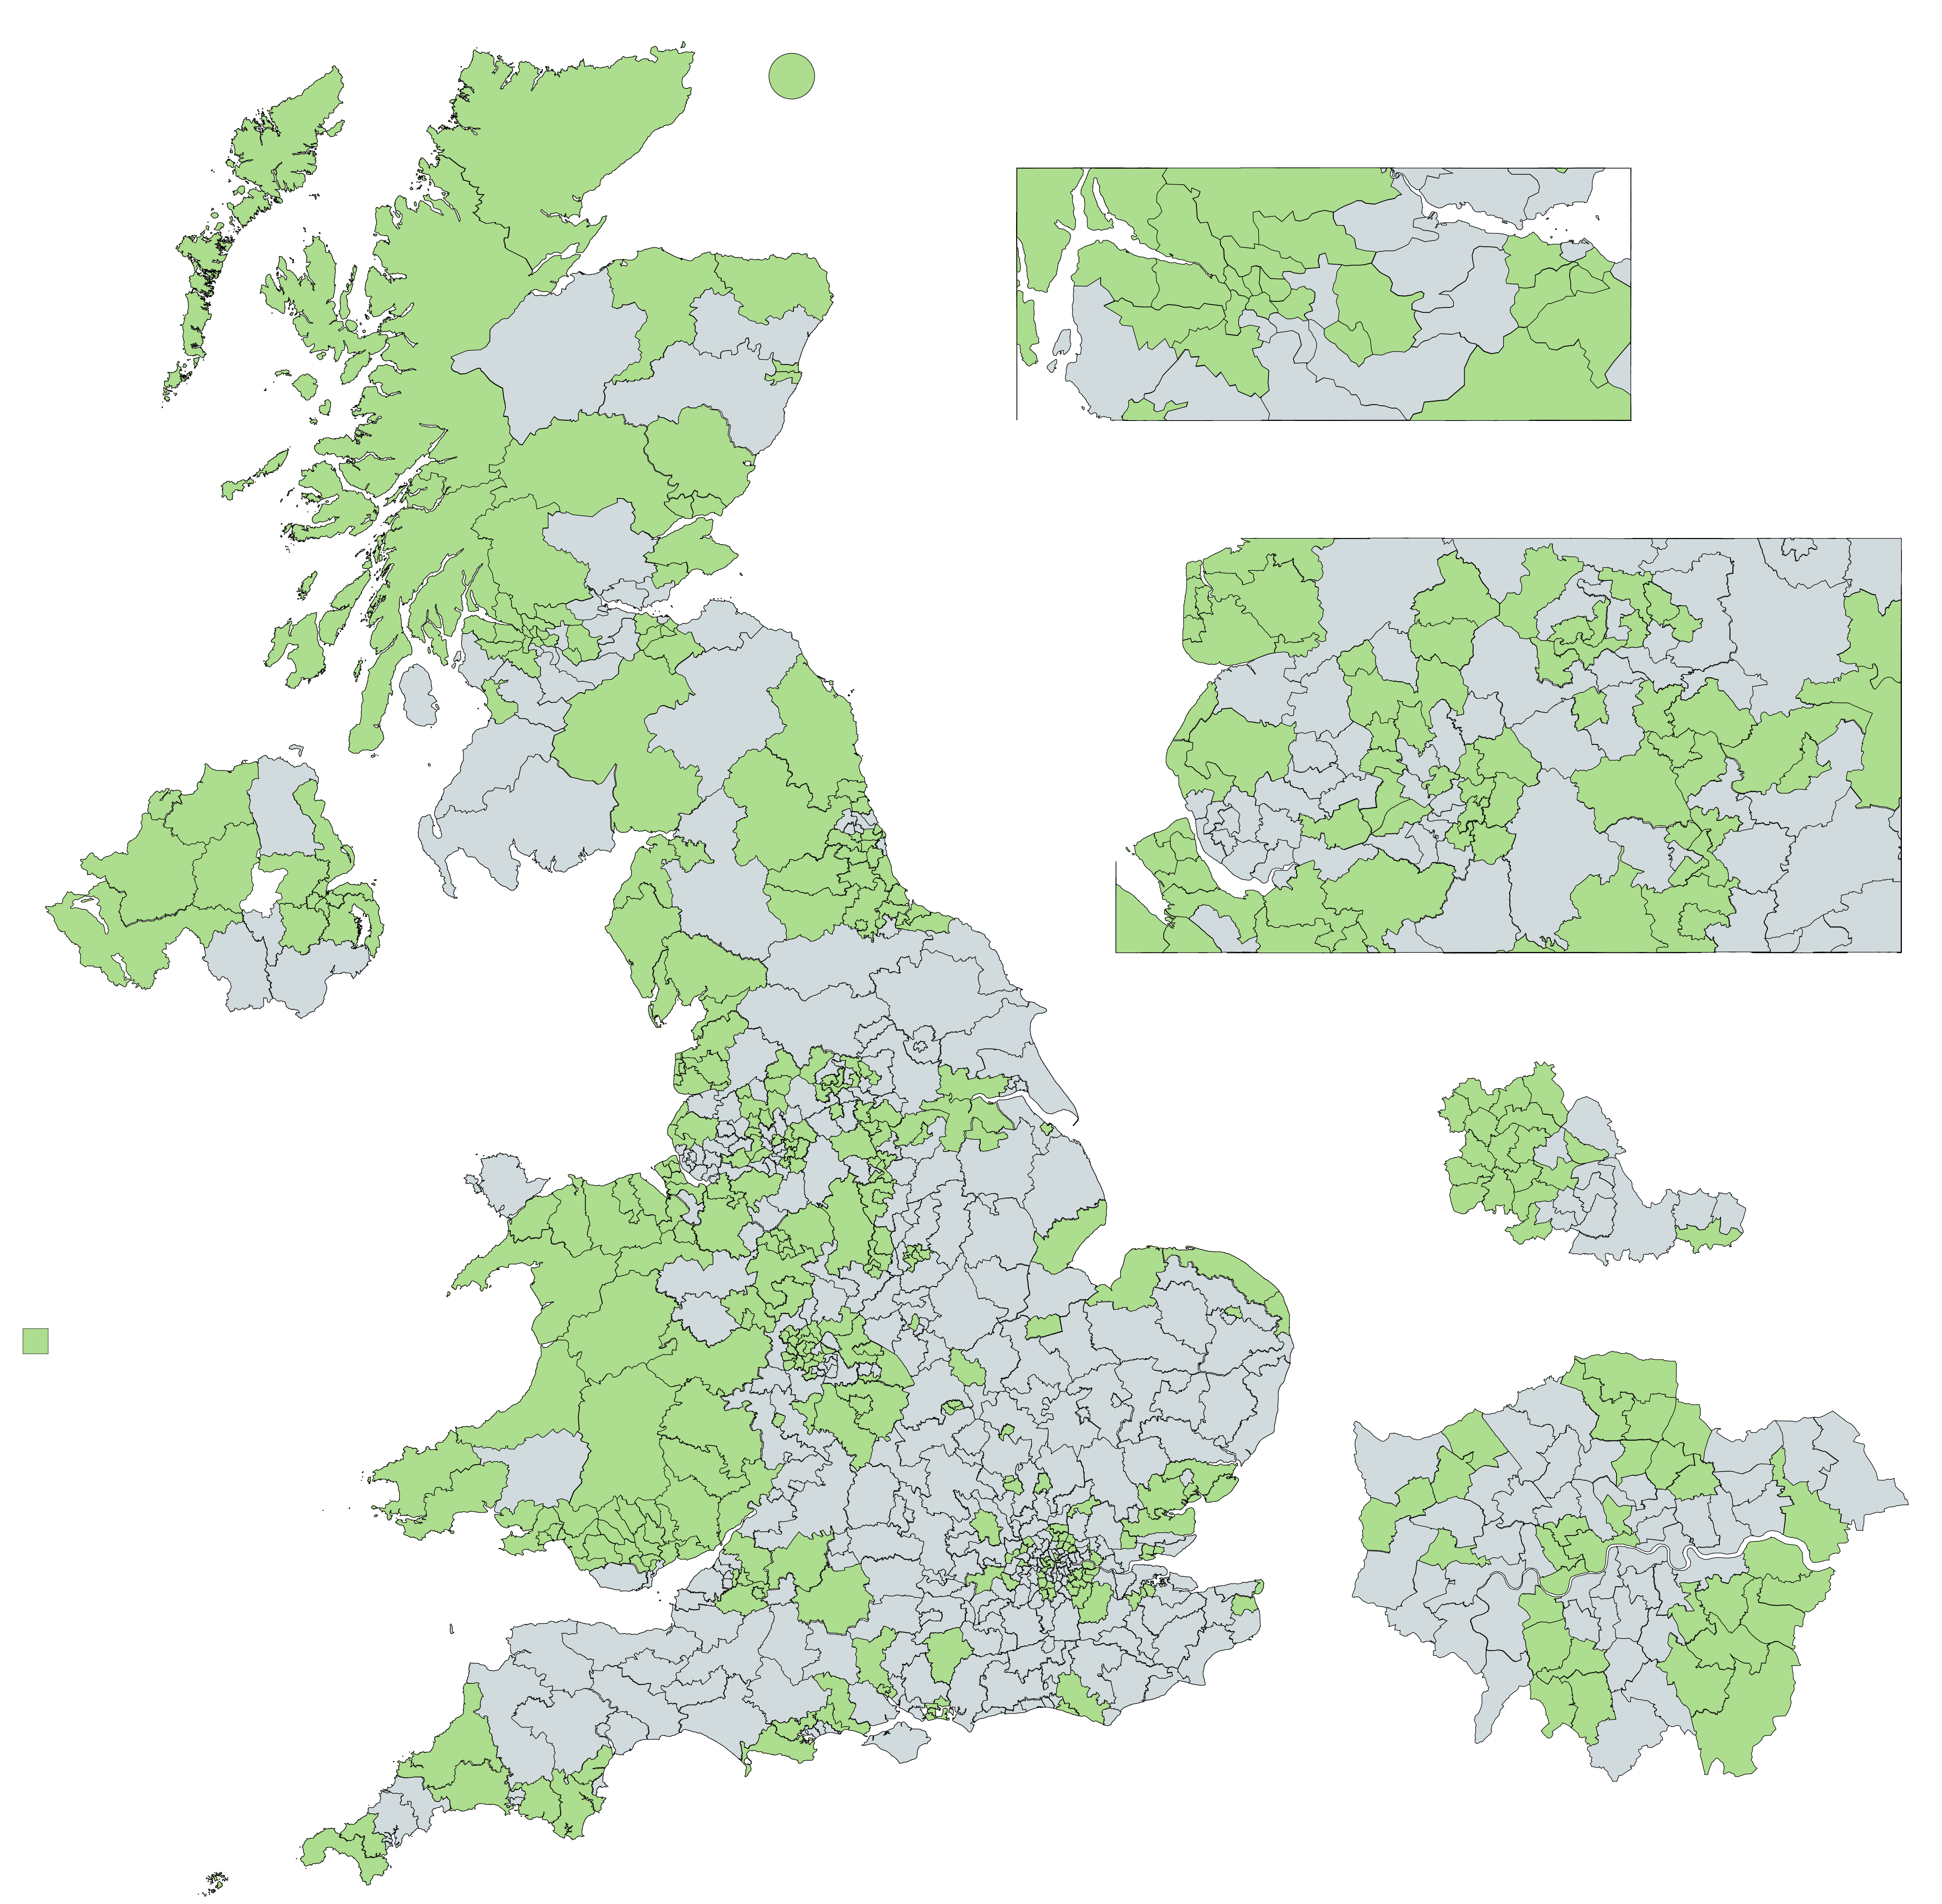 Map showing the 326 UK constituencies with the smallest electorate size